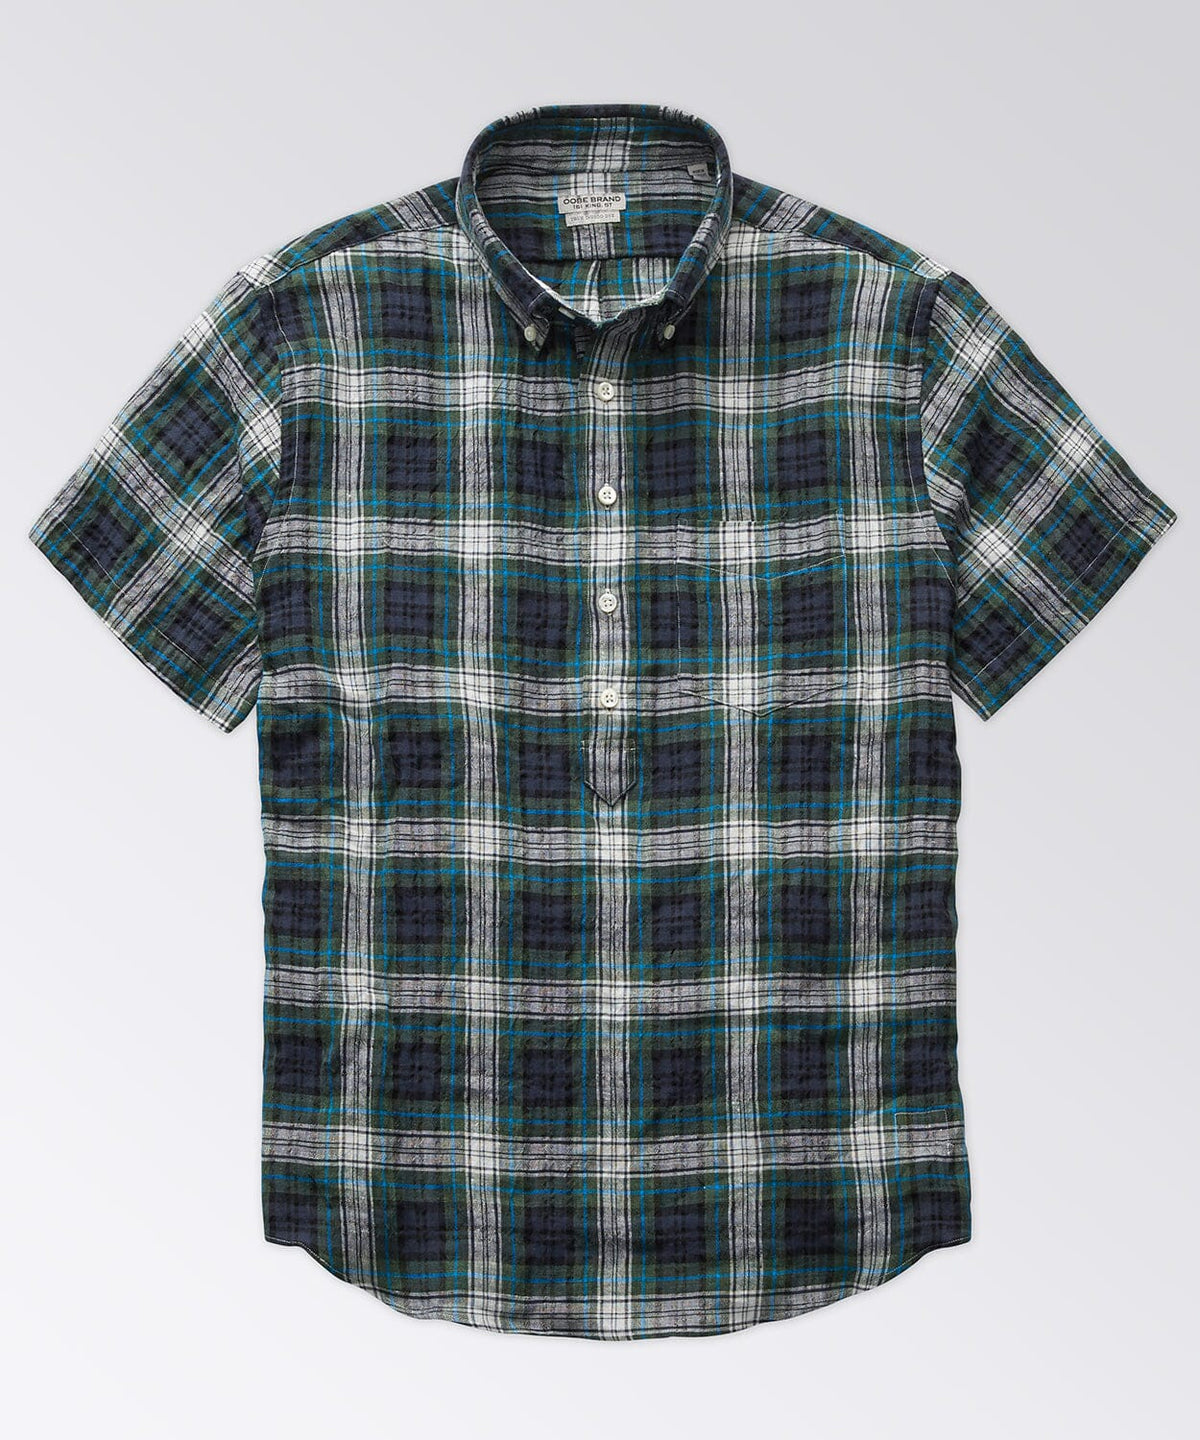 Lange Popover Shirt Button Downs OOBE BRAND Blue Madras Plaid S 